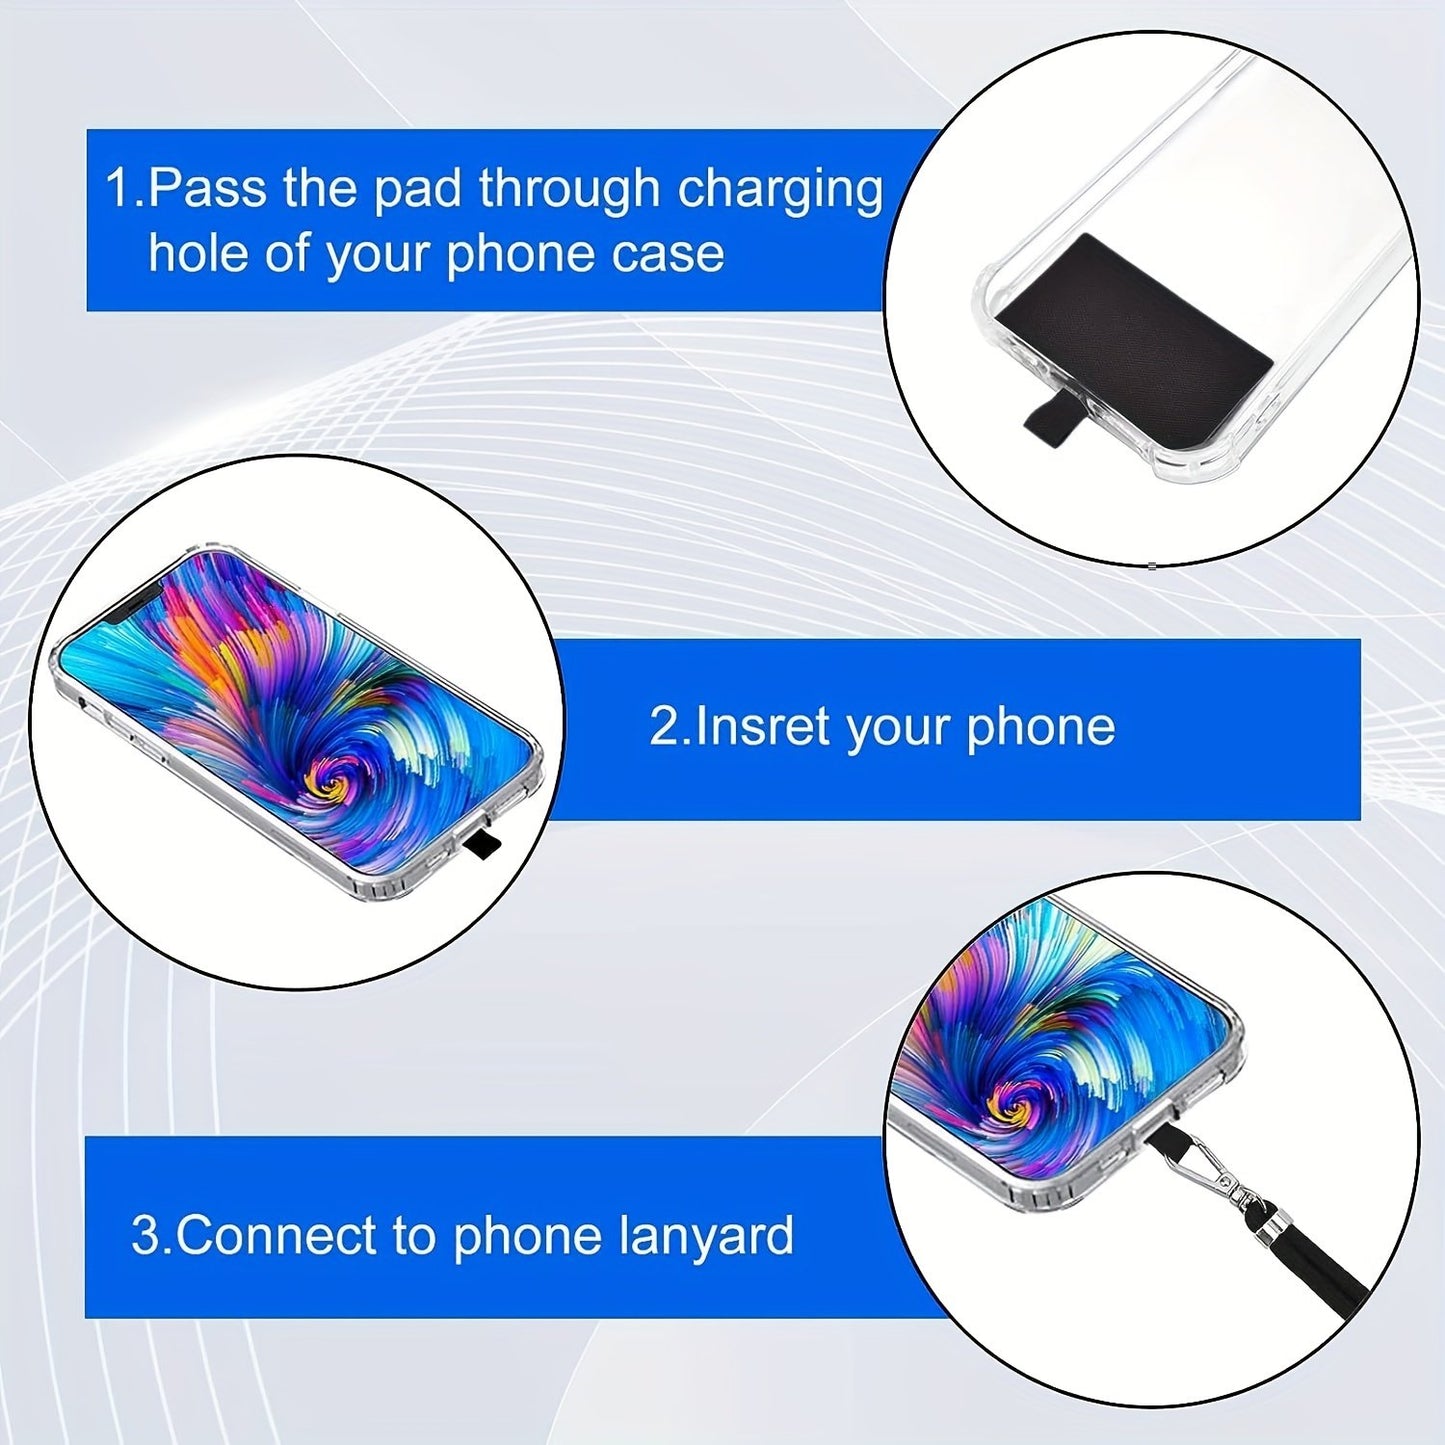 Universal Cell Phone Lanyard, Lanyard For Phone With Adjustable Nylon Neck Strap With Most Smartphones Phone Tether Can Be Combined With Any Phone Case